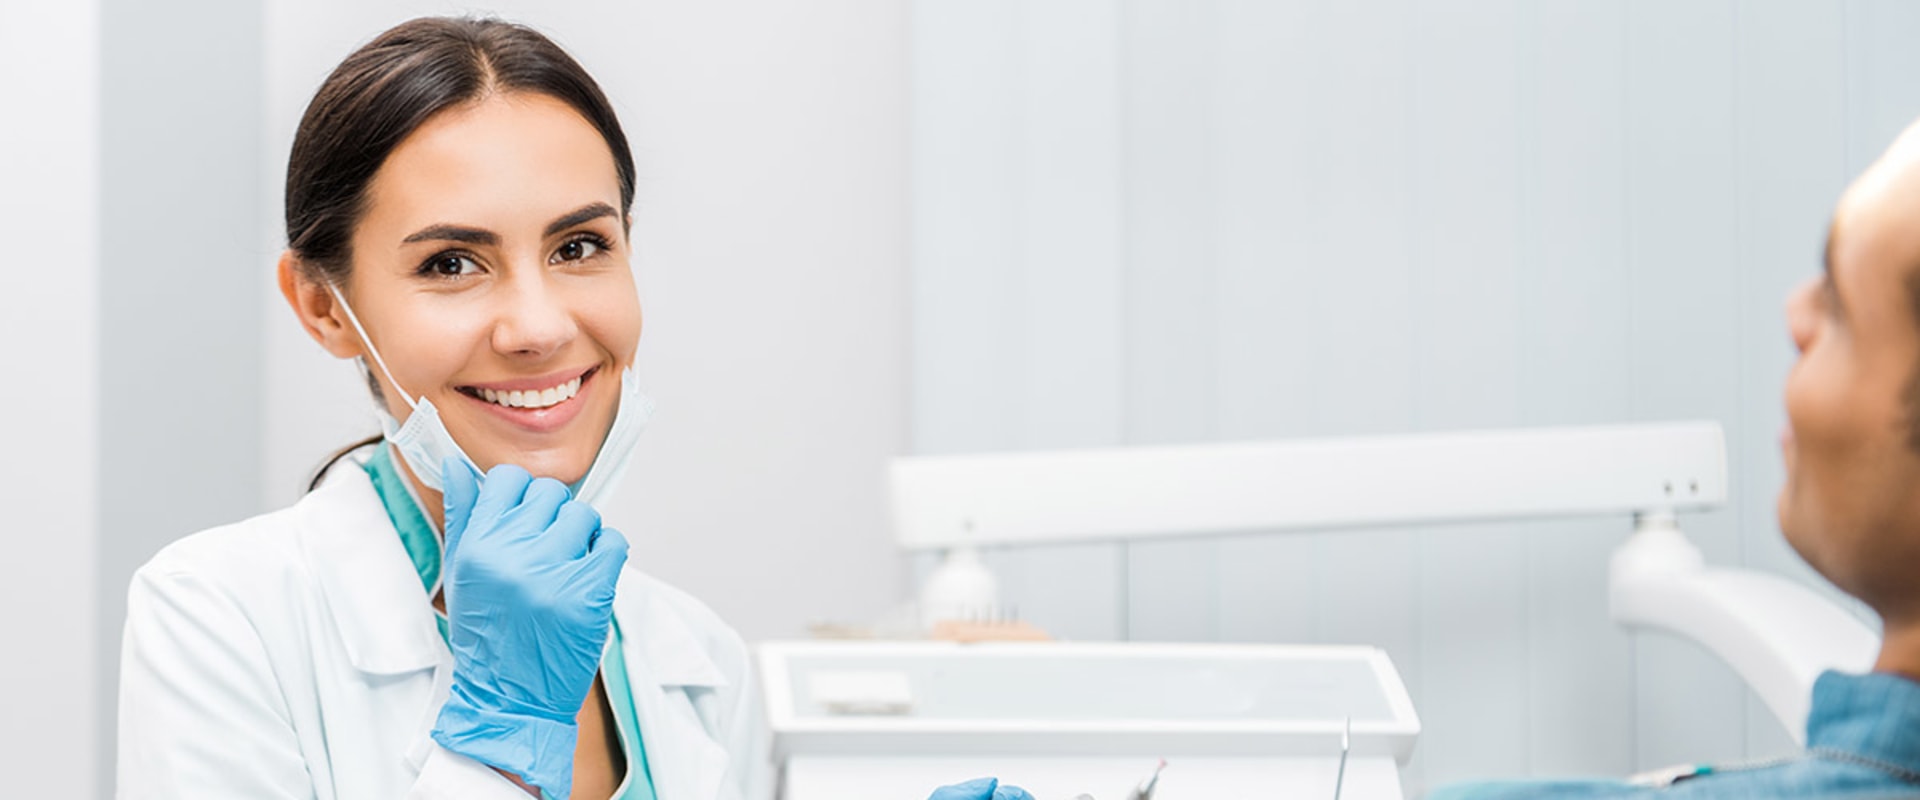 What is the difference between a dentist and an endodontist?